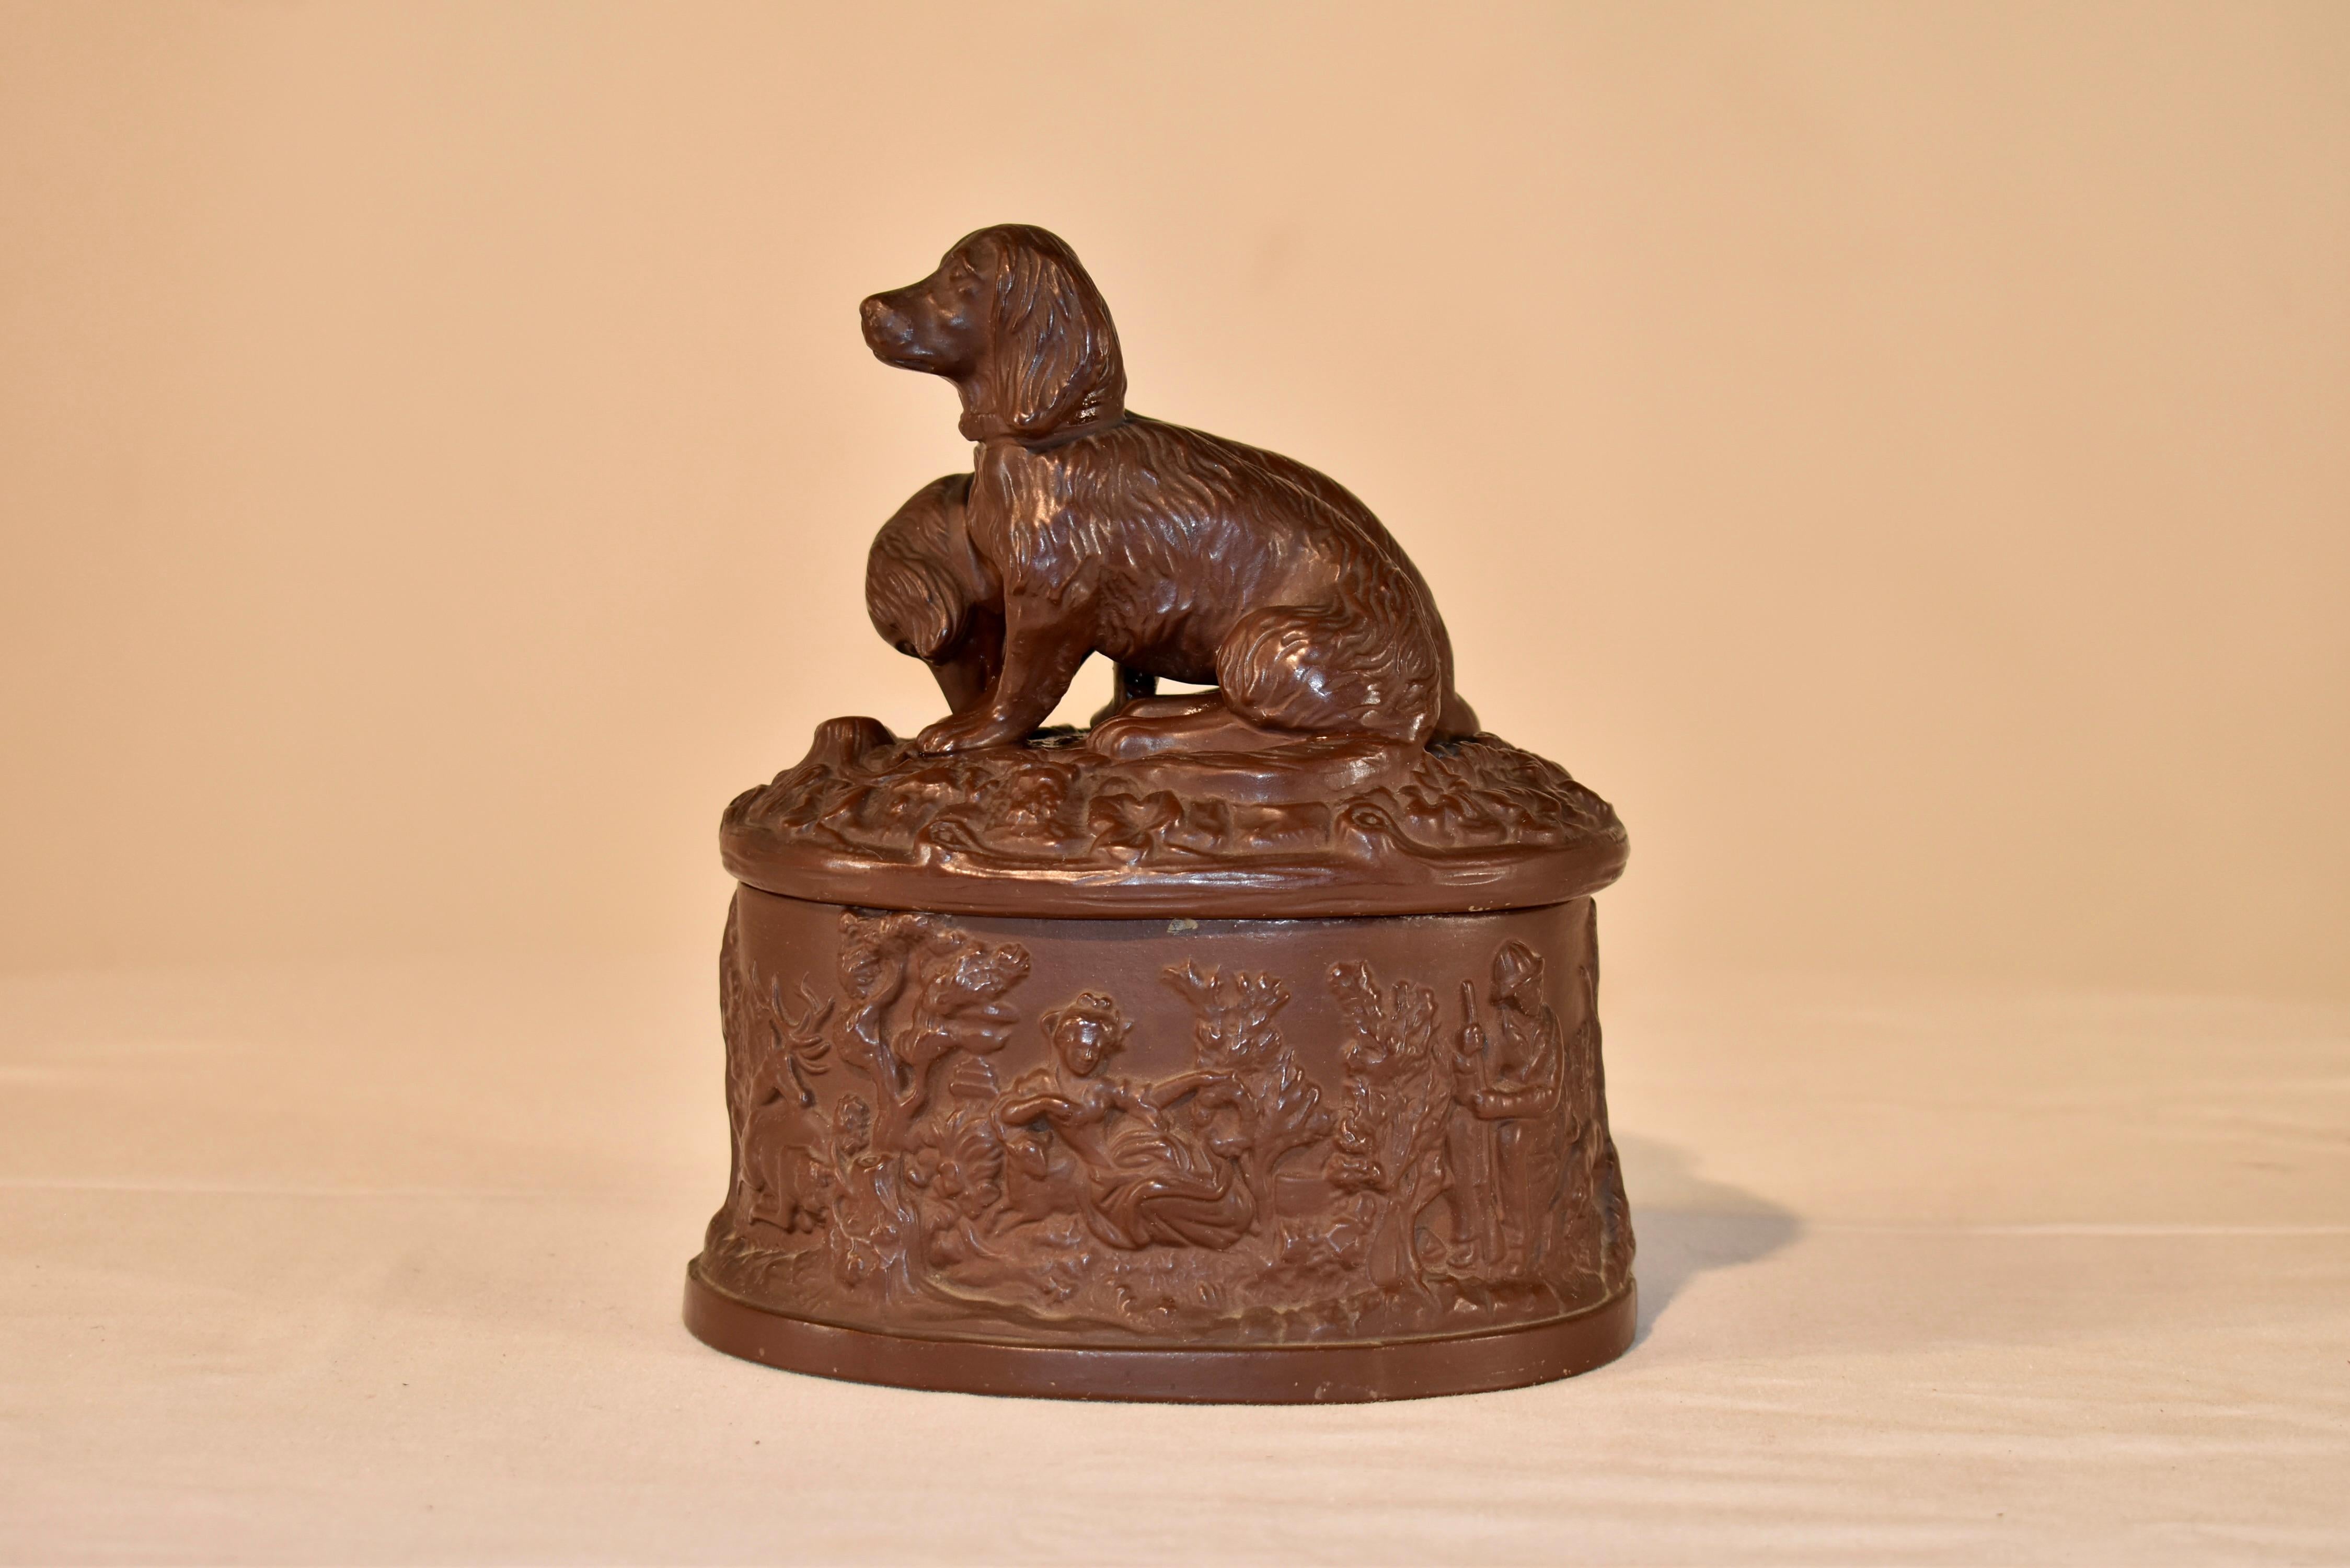 19th Century terracotta lidded box from Austria. There are two lovely molded dogs on the top, which are used for the handle. The base has a molded garden scene depicting animals and people interspersed with trees and foliage. Marked on the base EGW.